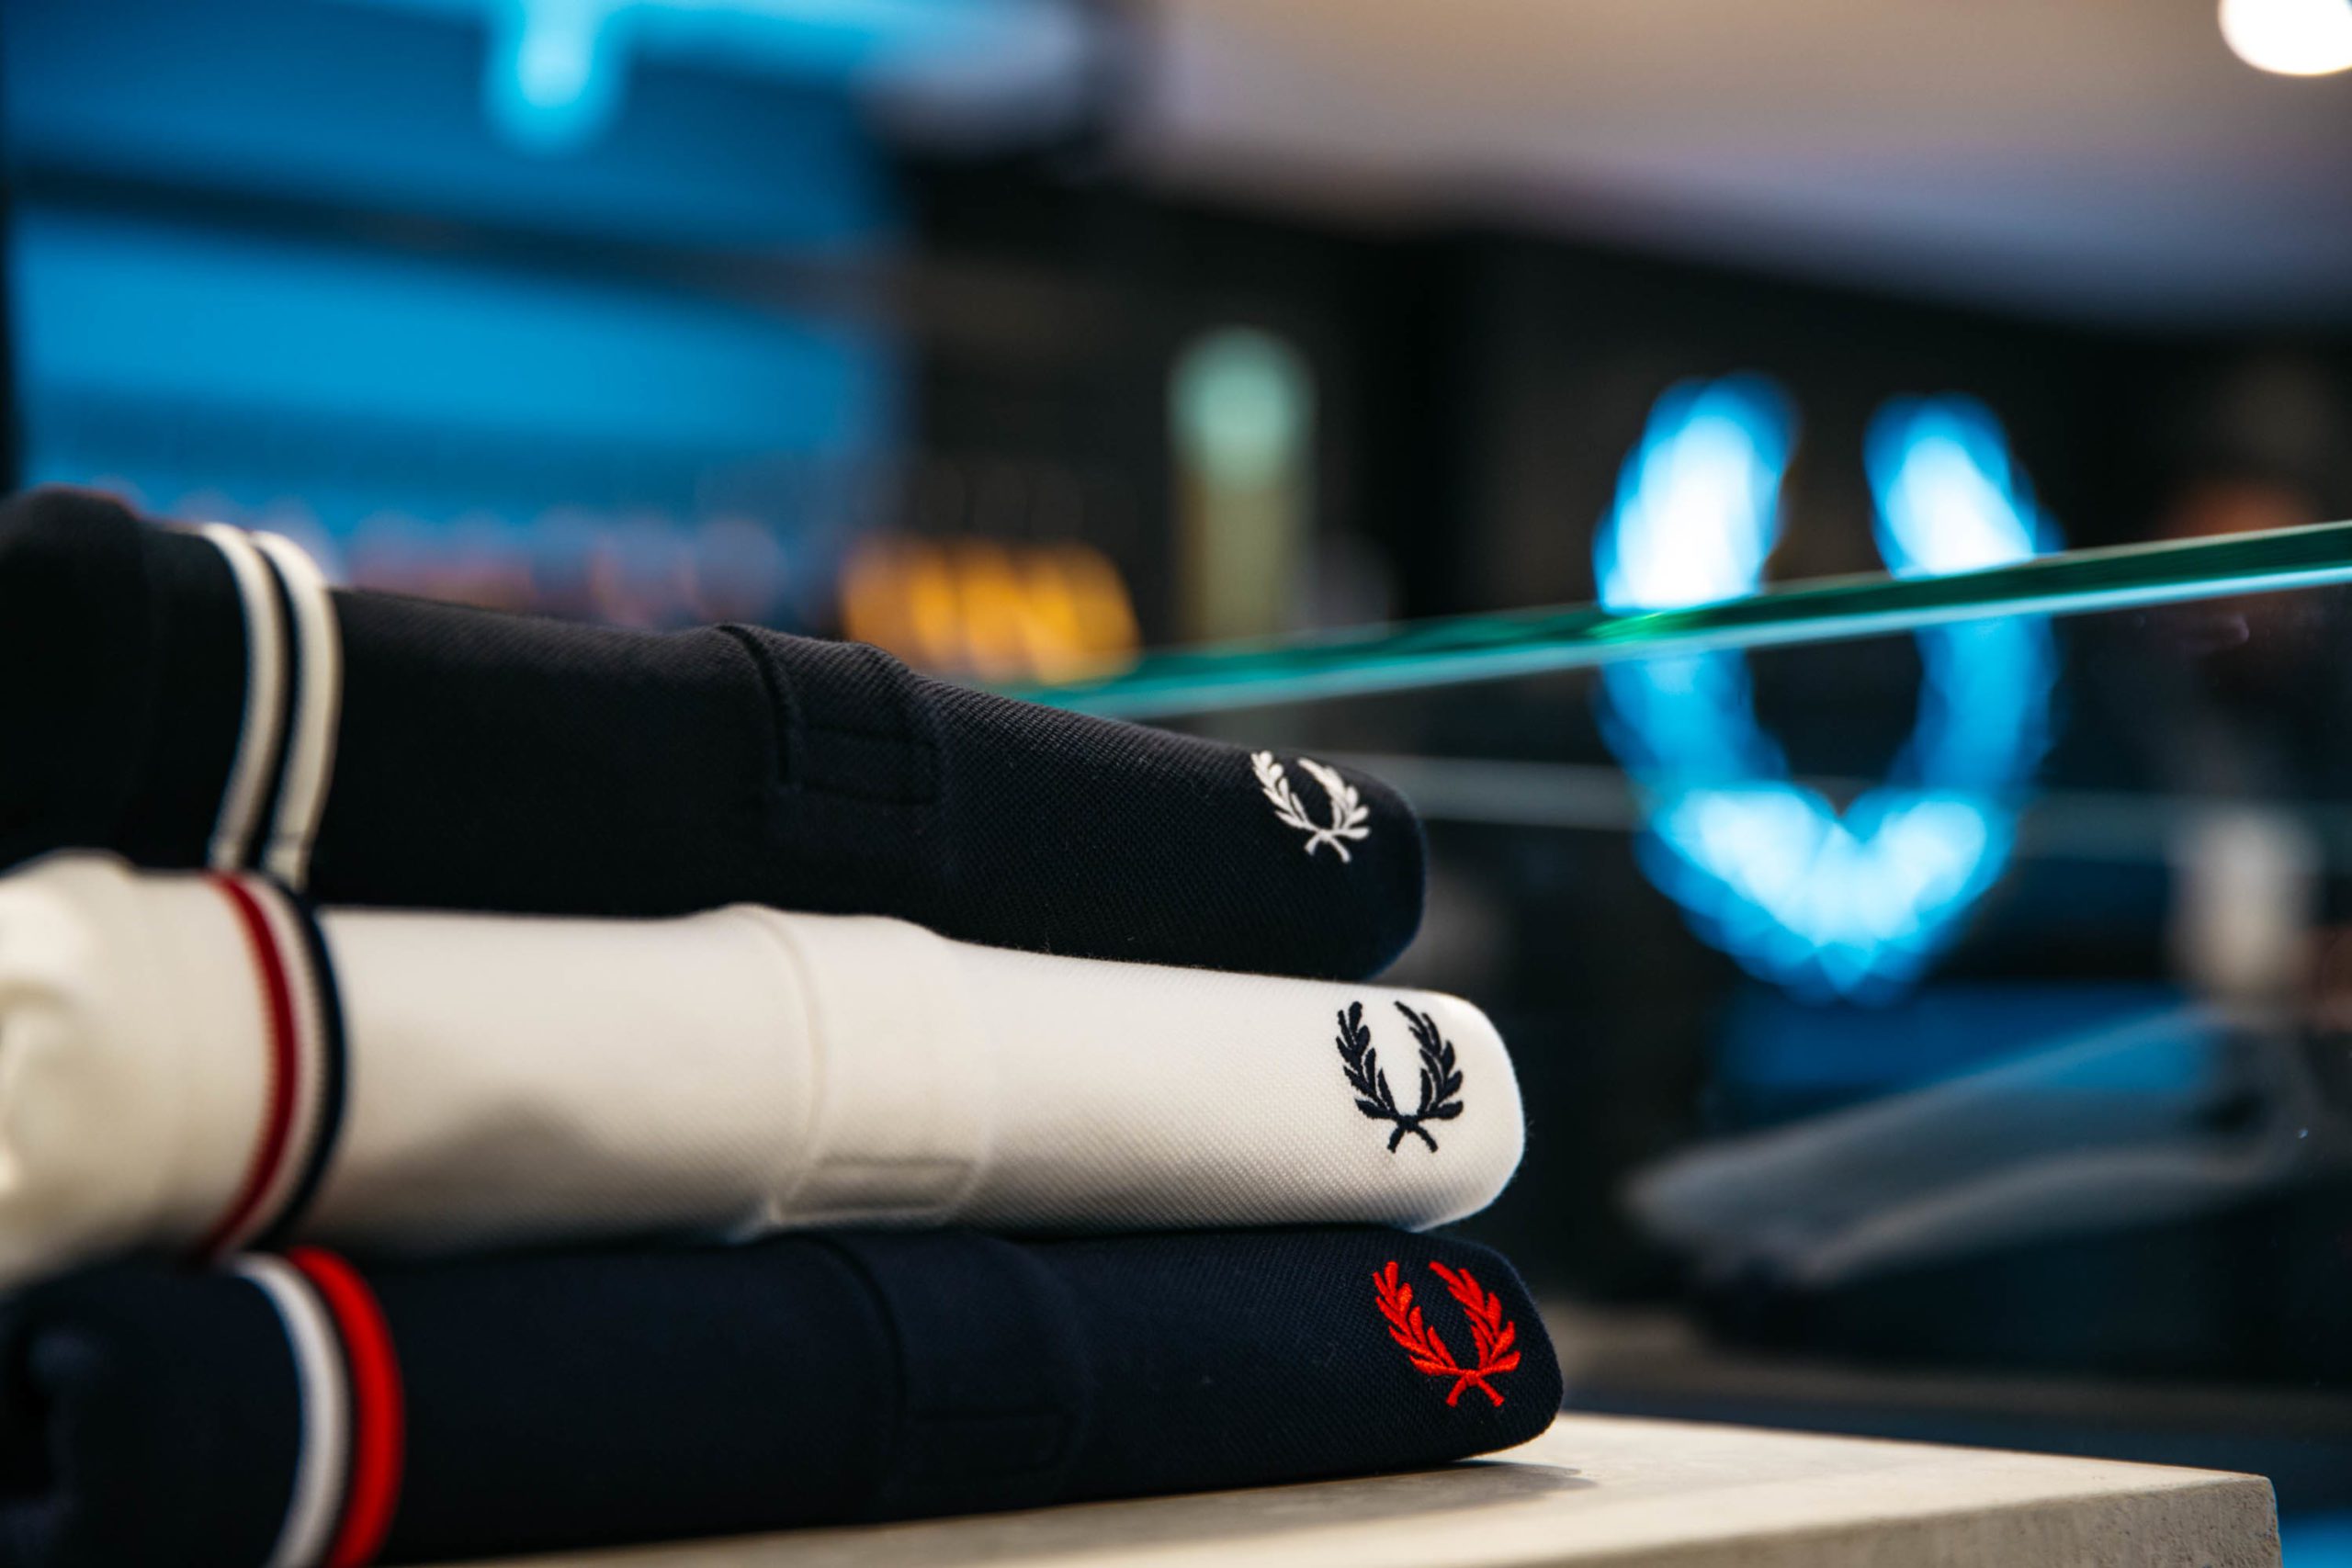 Navy, White and Black folded shirts on display at Fred Perry located in Dukes Lane in Brighton.